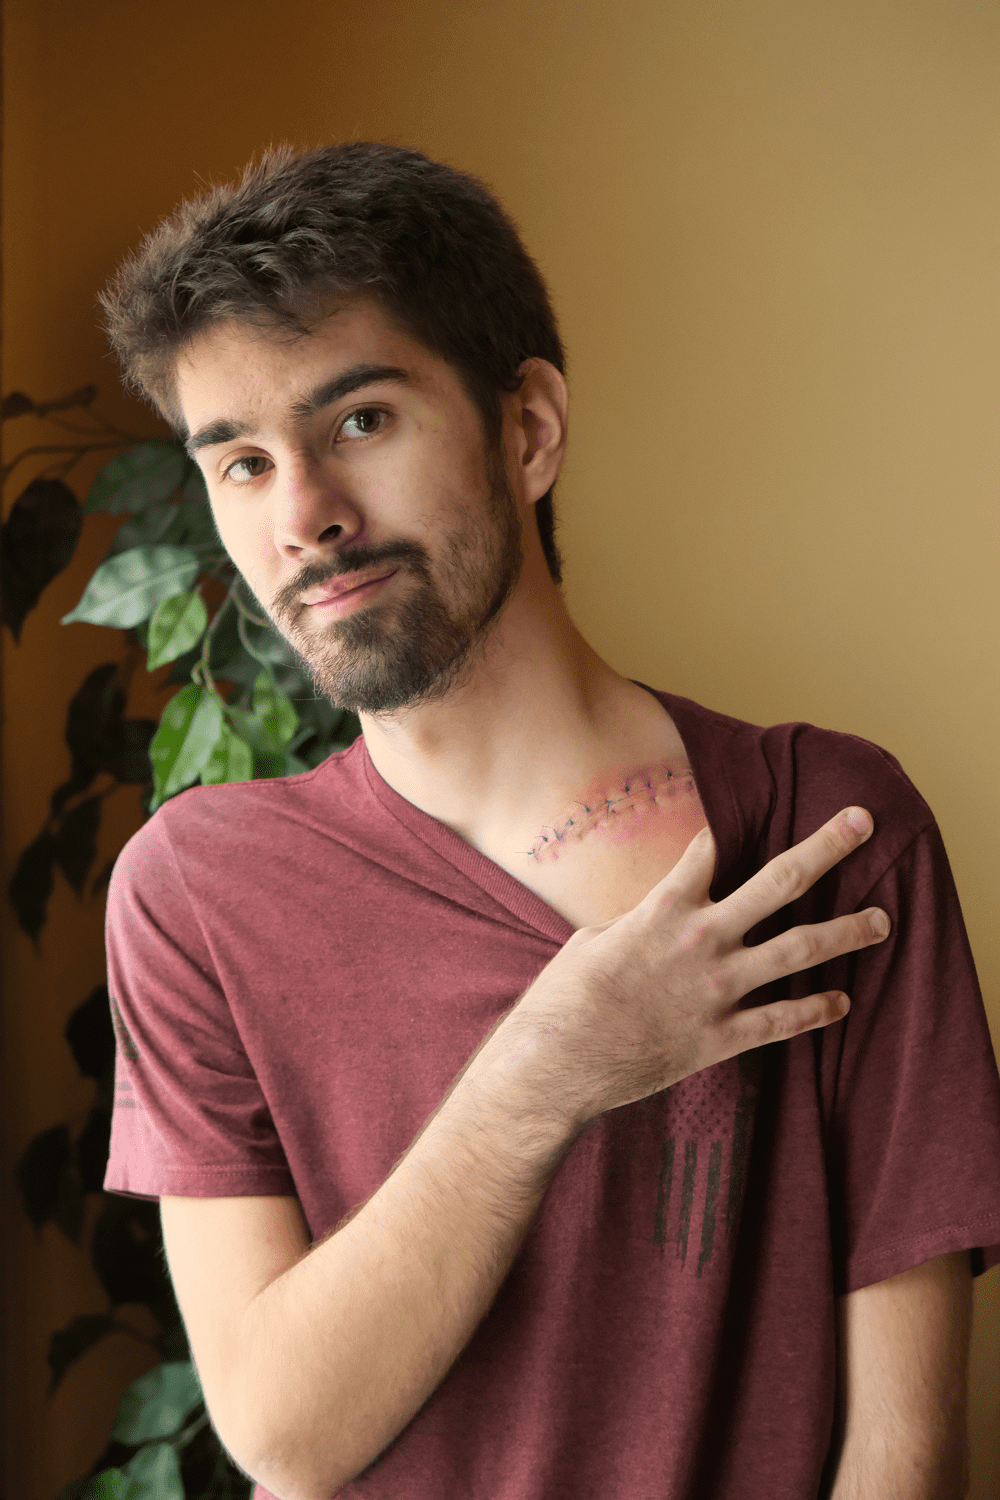 Rayce Hooper, a young white man with brown hair and beard, shows off a large scar under his collarbone.